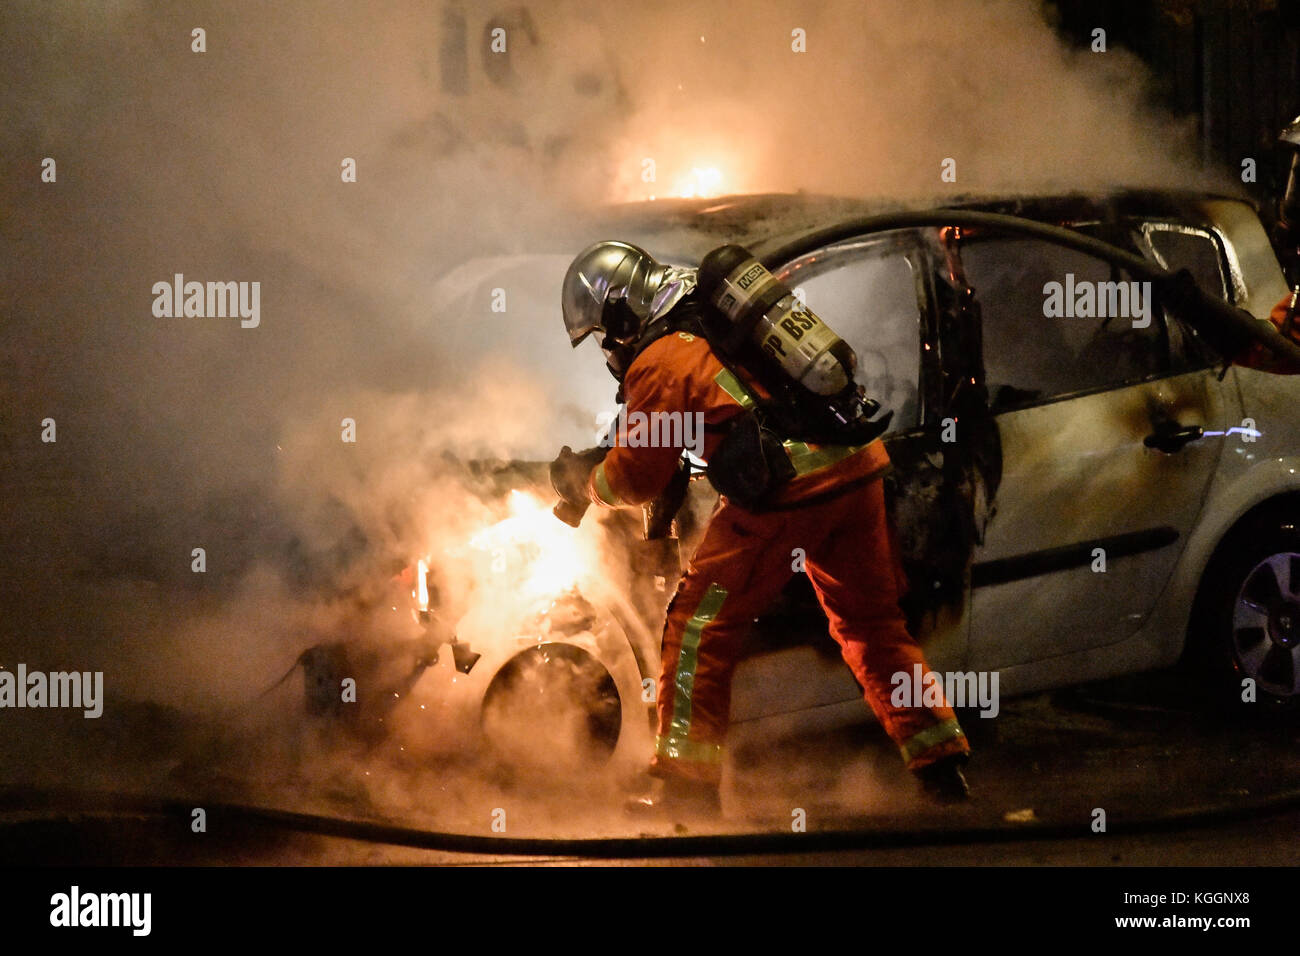 Julien Mattia / Le Pictorium -  Car on fire -  08/11/2017  -  France / ? haut de seine ? / Malakoff  -  Paris firefighters extinguish a burnt car in Malakoff. Of unknown origin the engine fire threatens an abandoned building, forcing the Paris fire to intervene in the building after extinguishing the fire. Stock Photo